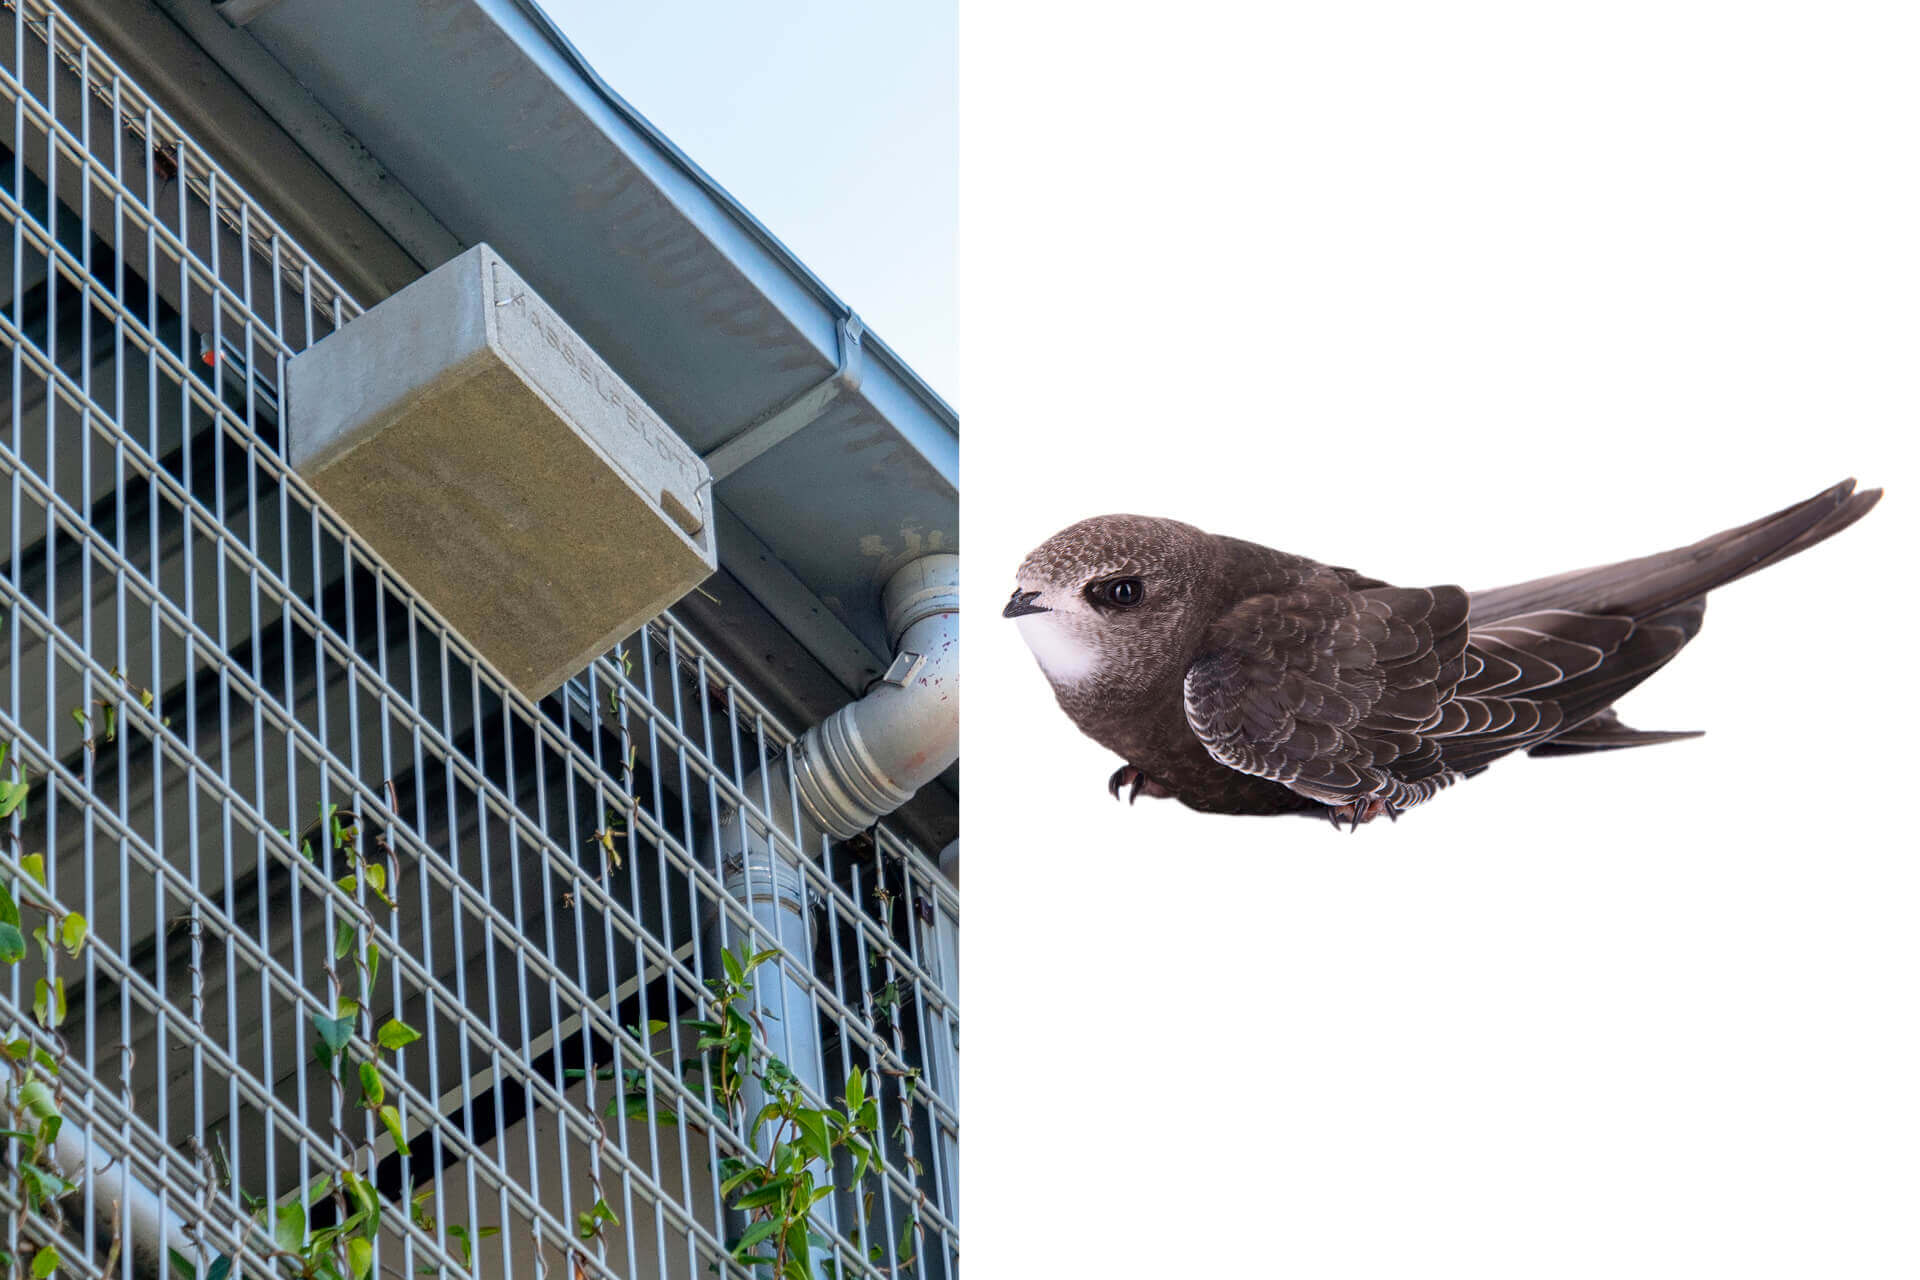 Boxes for common swifts: As a substitute for its natural breeding places in rocks and cliffs, the common swift likes to make its nest on buildings at a height of 6 to 7 meters—like here on Schreiner Group’s parking garage.